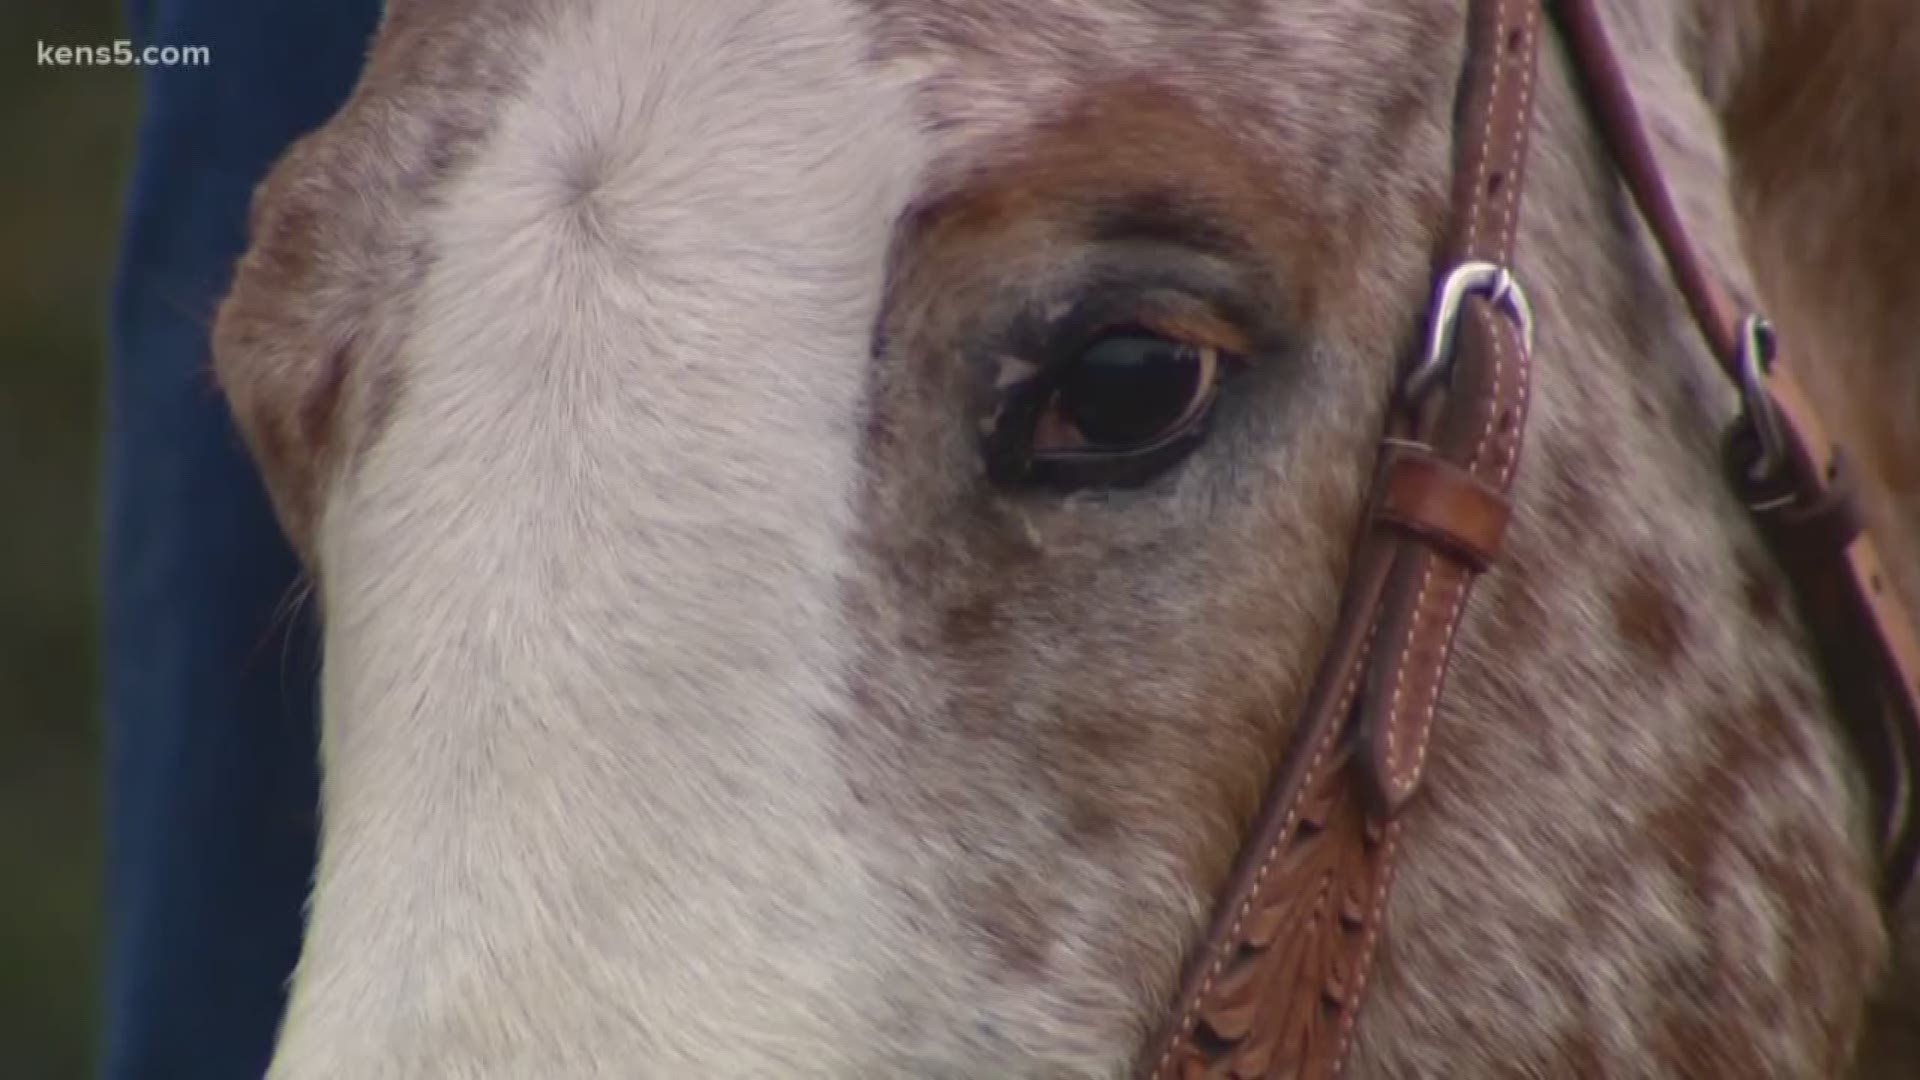 KENS 5's Barry Davis checks out a ranch in Bandera where you can ride a horse and do more than what the typical dude ranch offers.